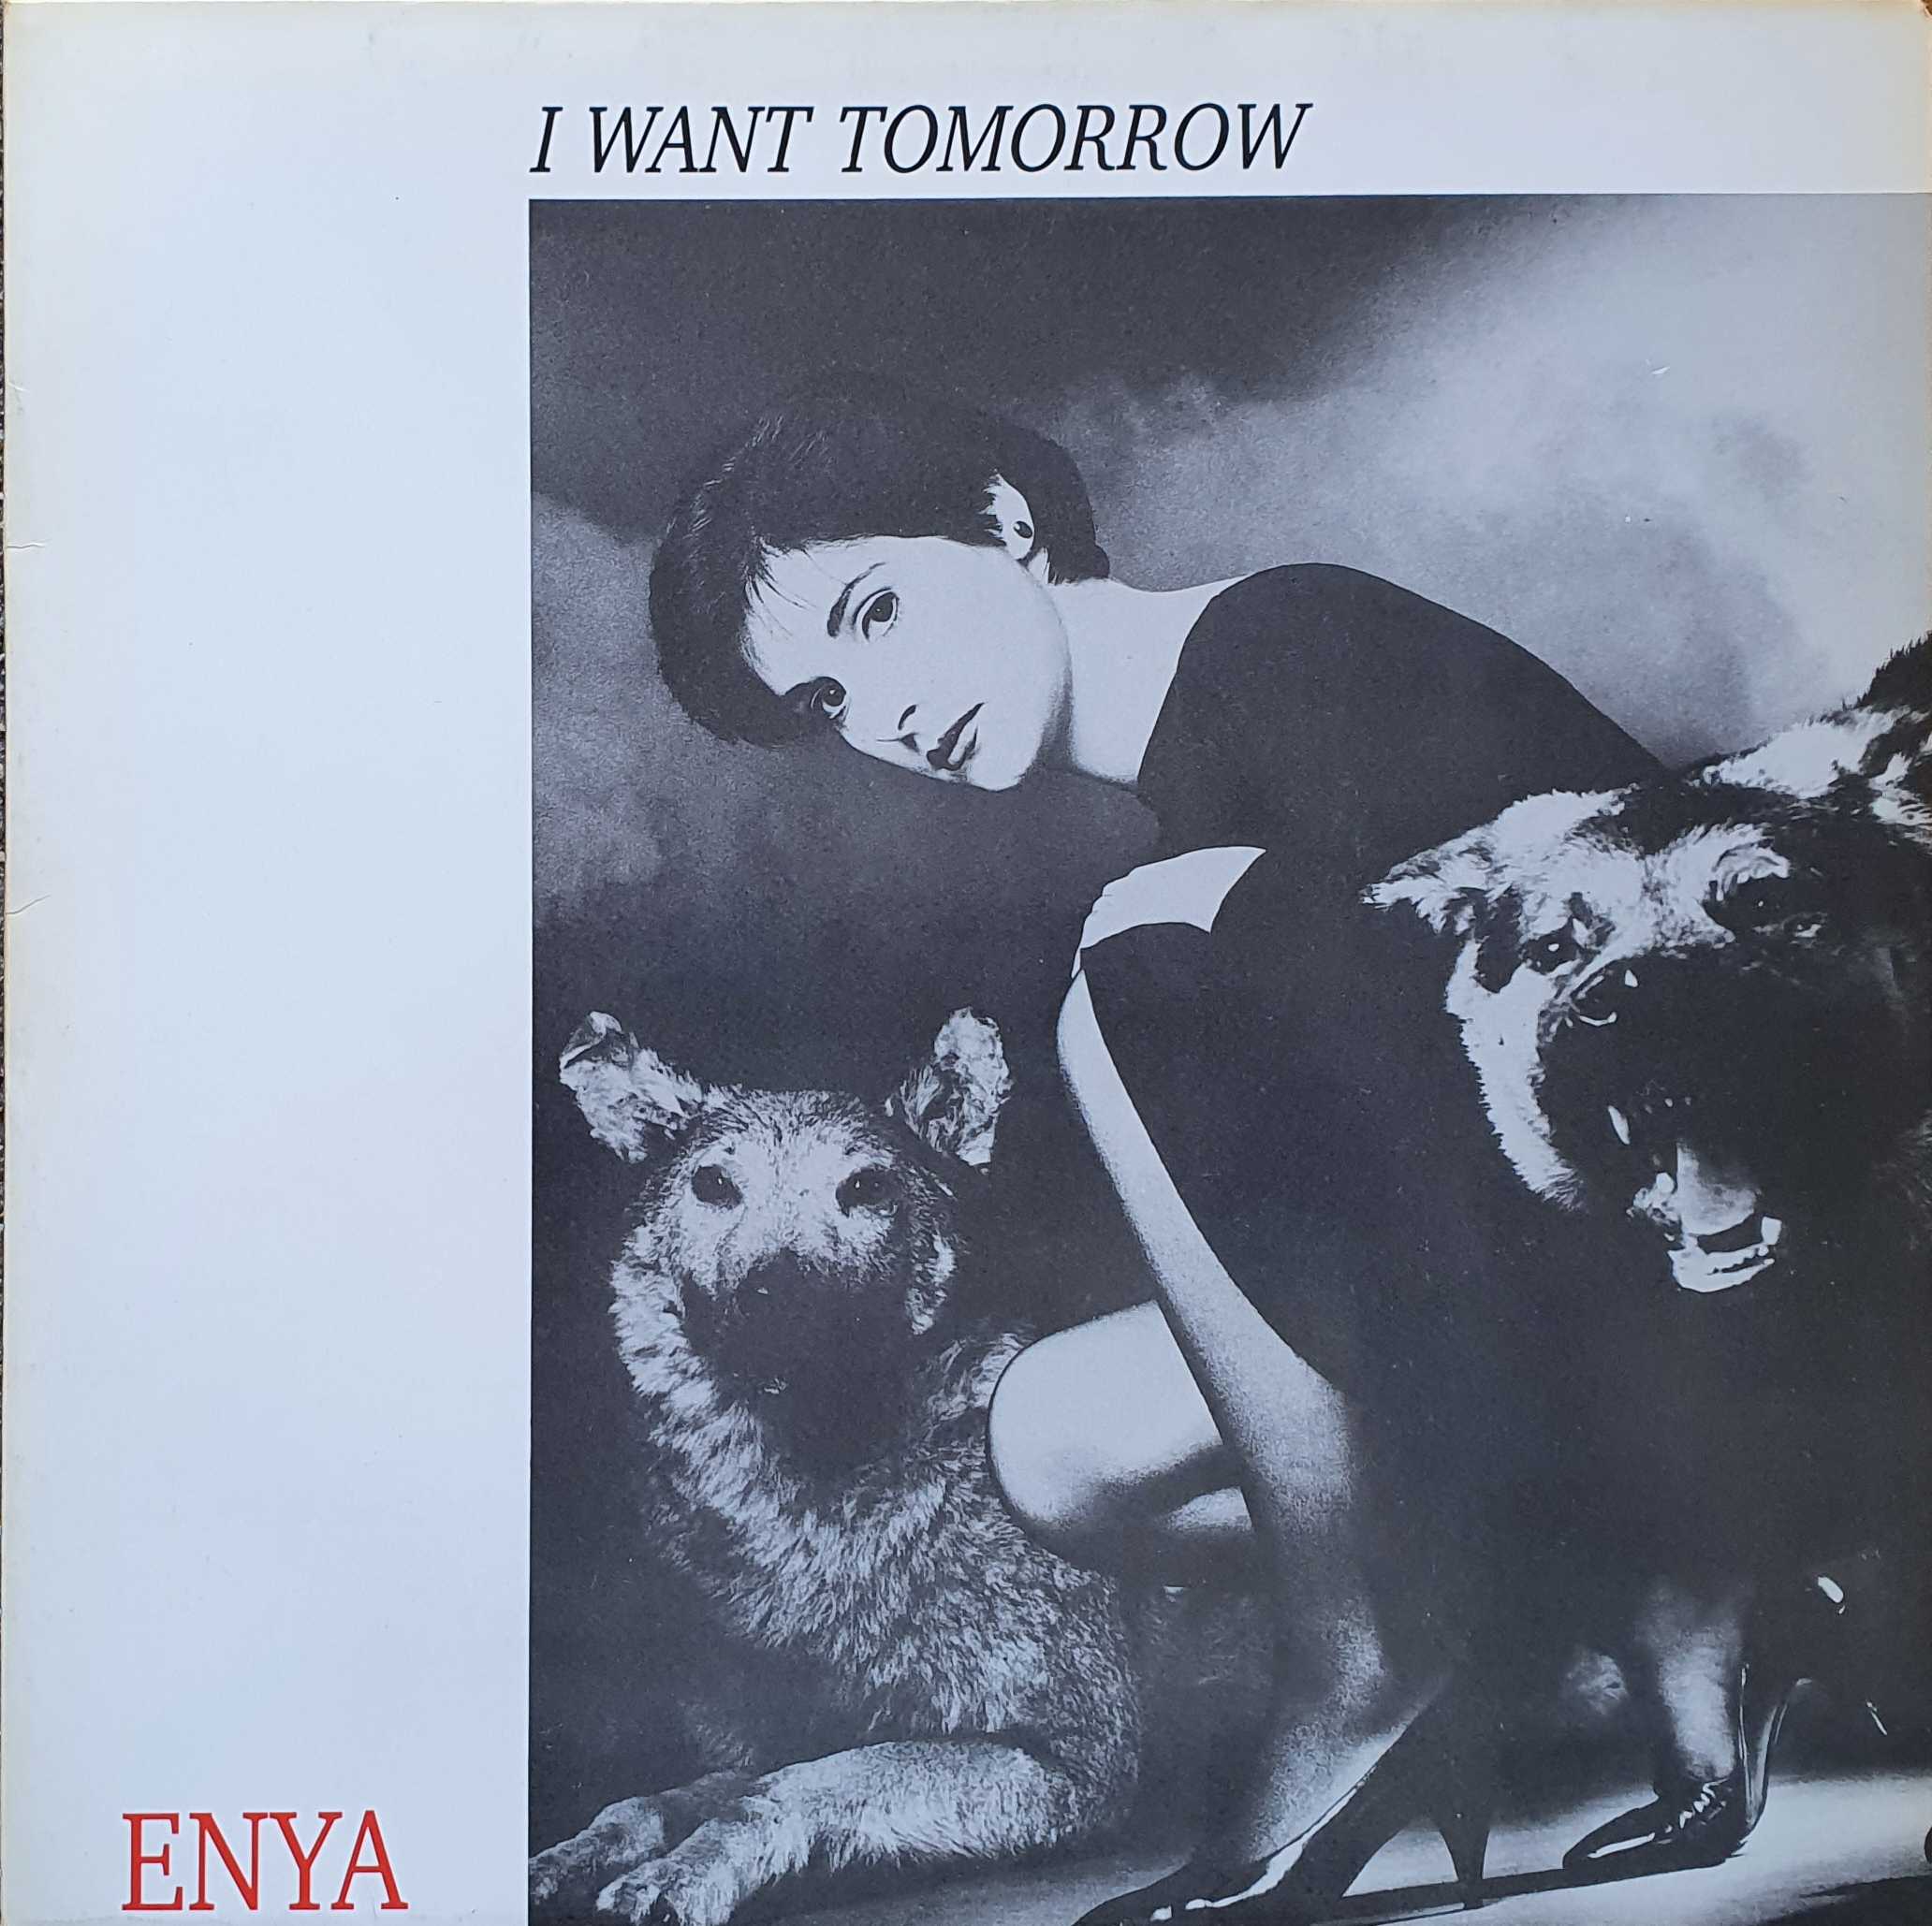 Picture of EDL 2511-0 I want tomorrow (The Celts) by artist Enya / Roma Ryan from the BBC 12inches - Records and Tapes library